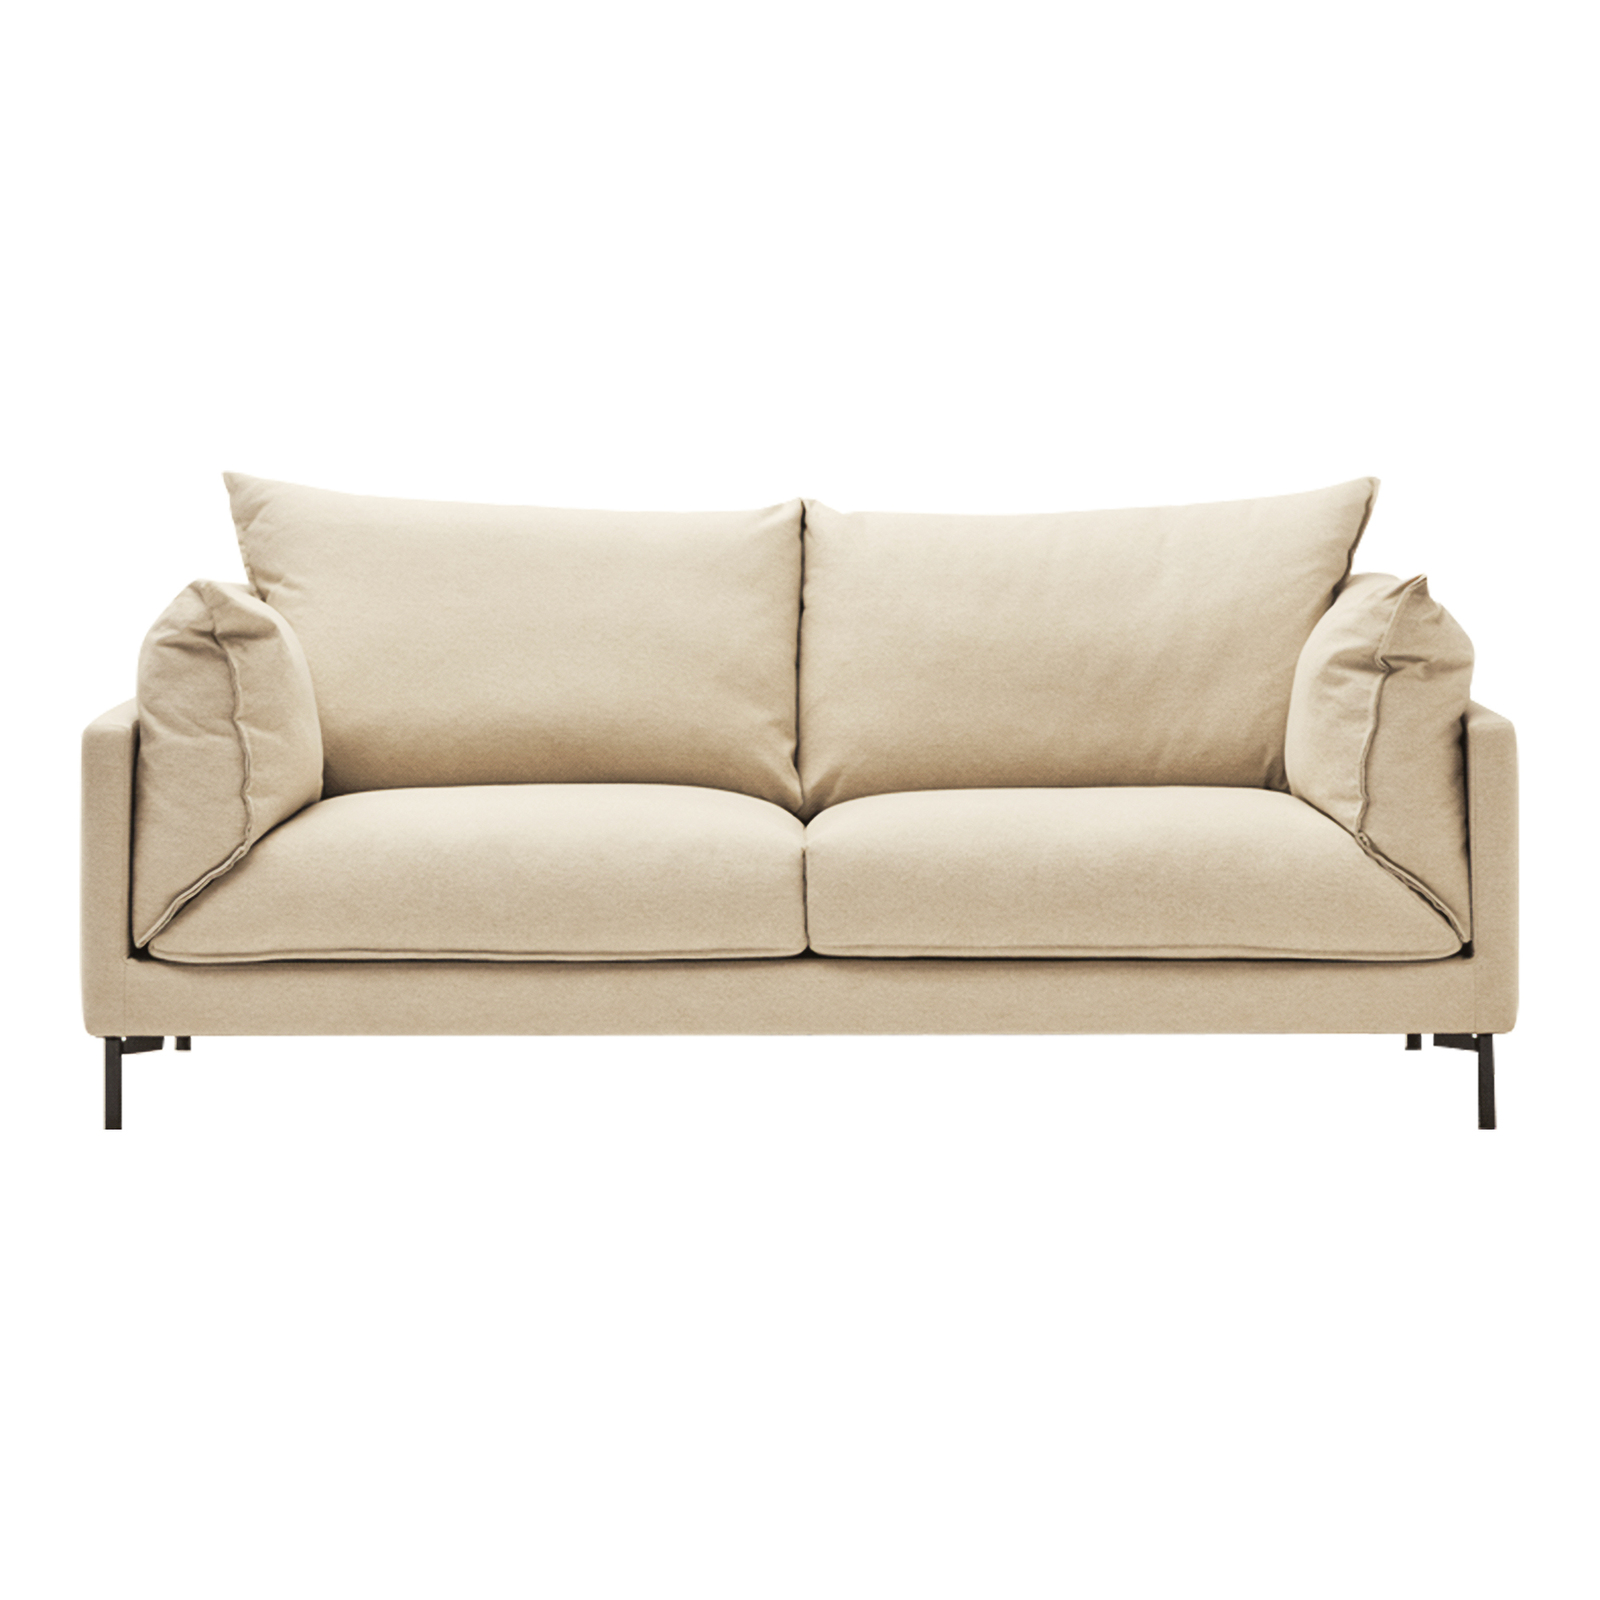 Modern Sofa Large Double 2-3 Seater Couch - Off White Fabric